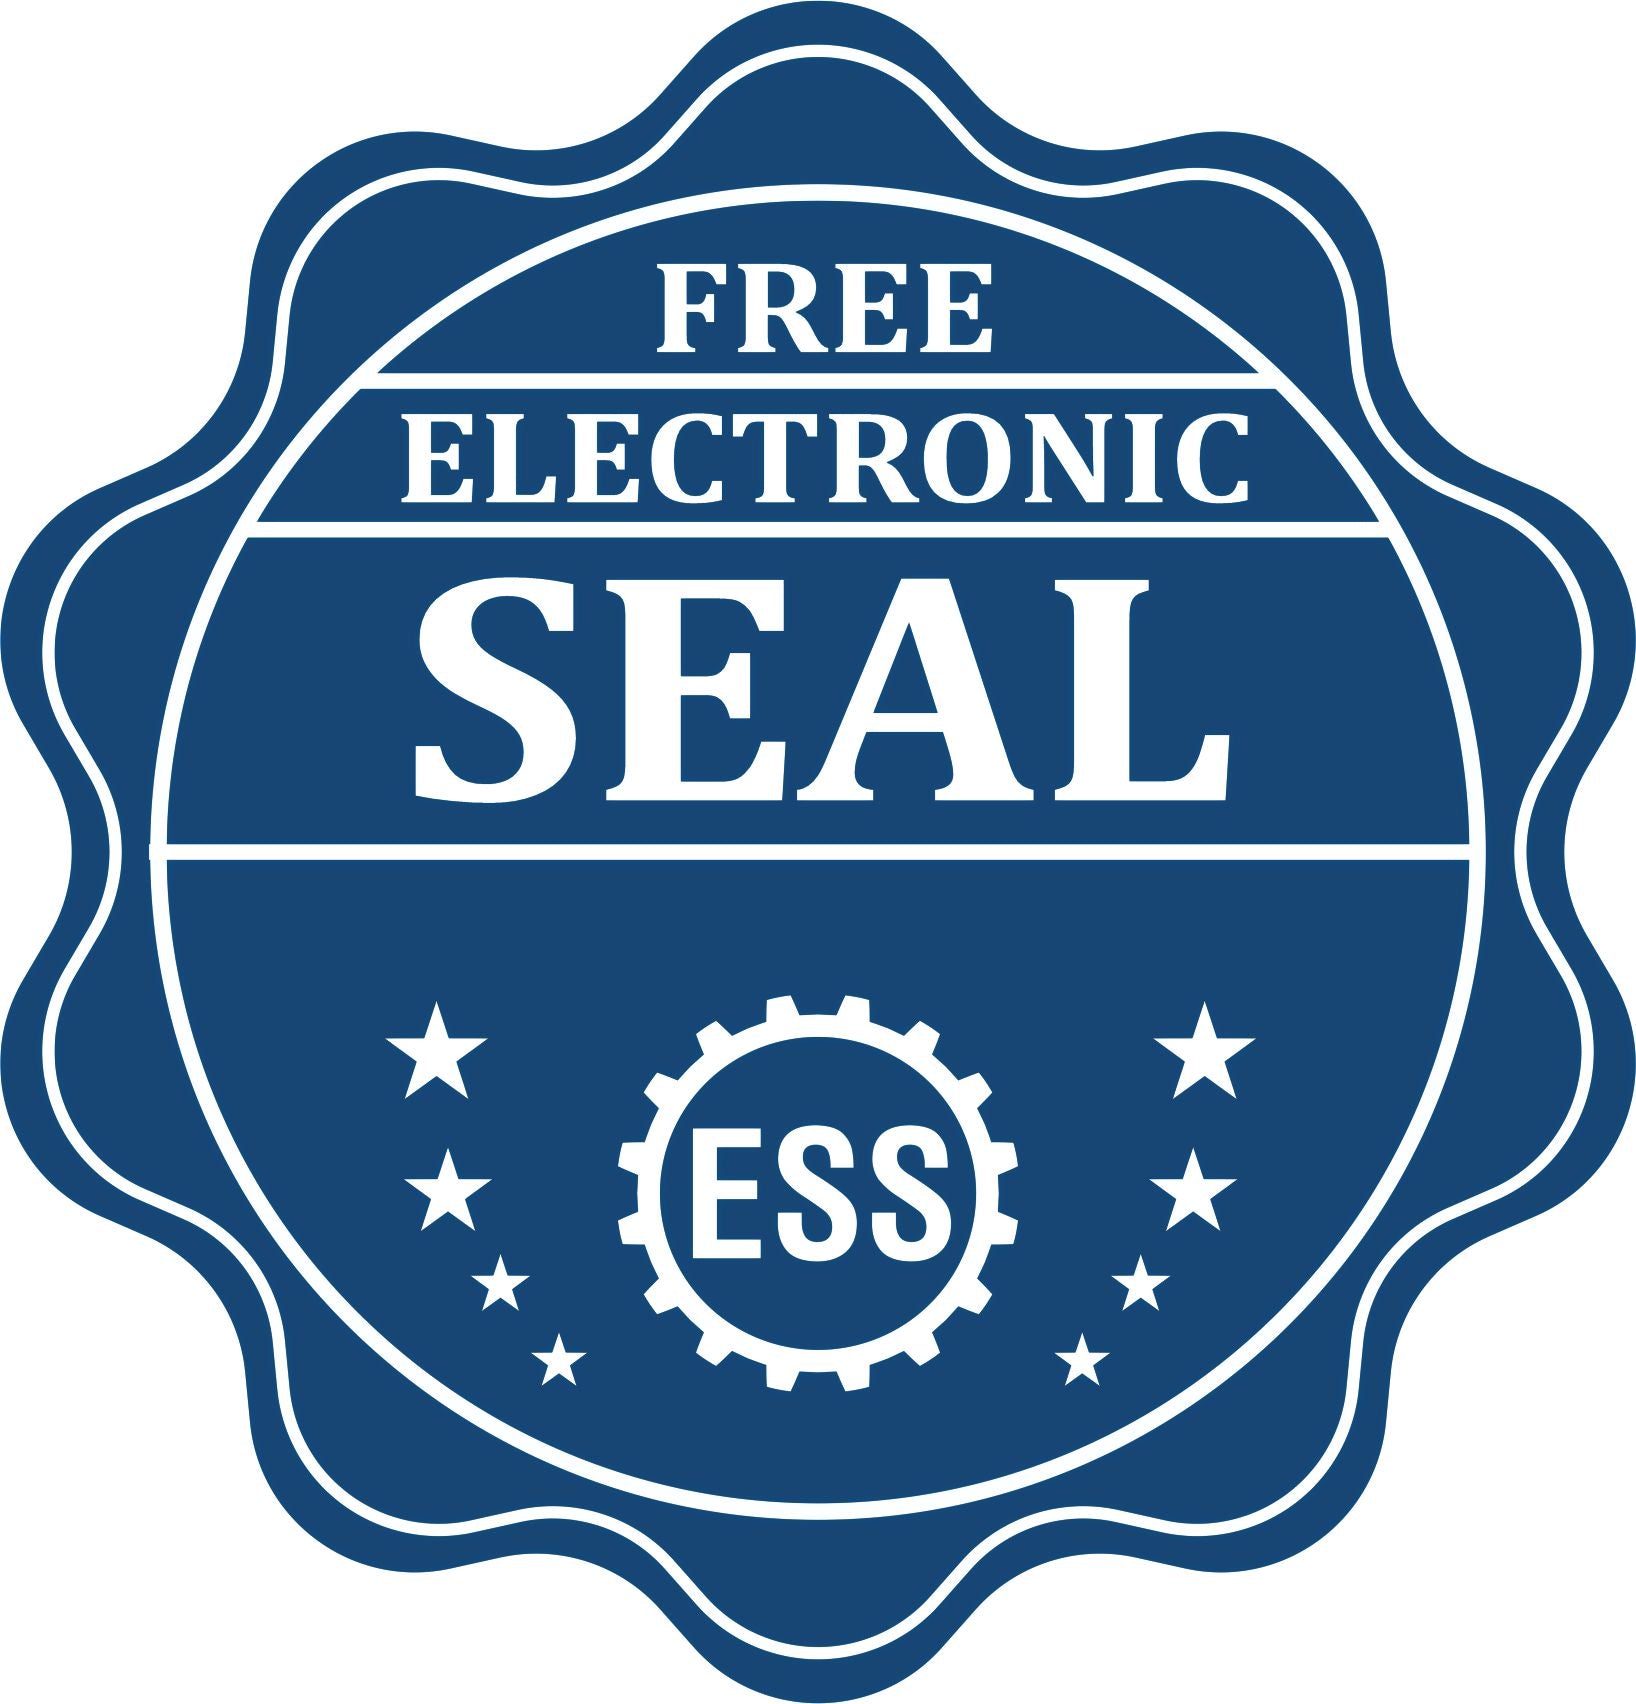 A badge showing a free electronic seal for the Slim Pre-Inked Arkansas Landscape Architect Seal Stamp with stars and the ESS gear on the emblem.